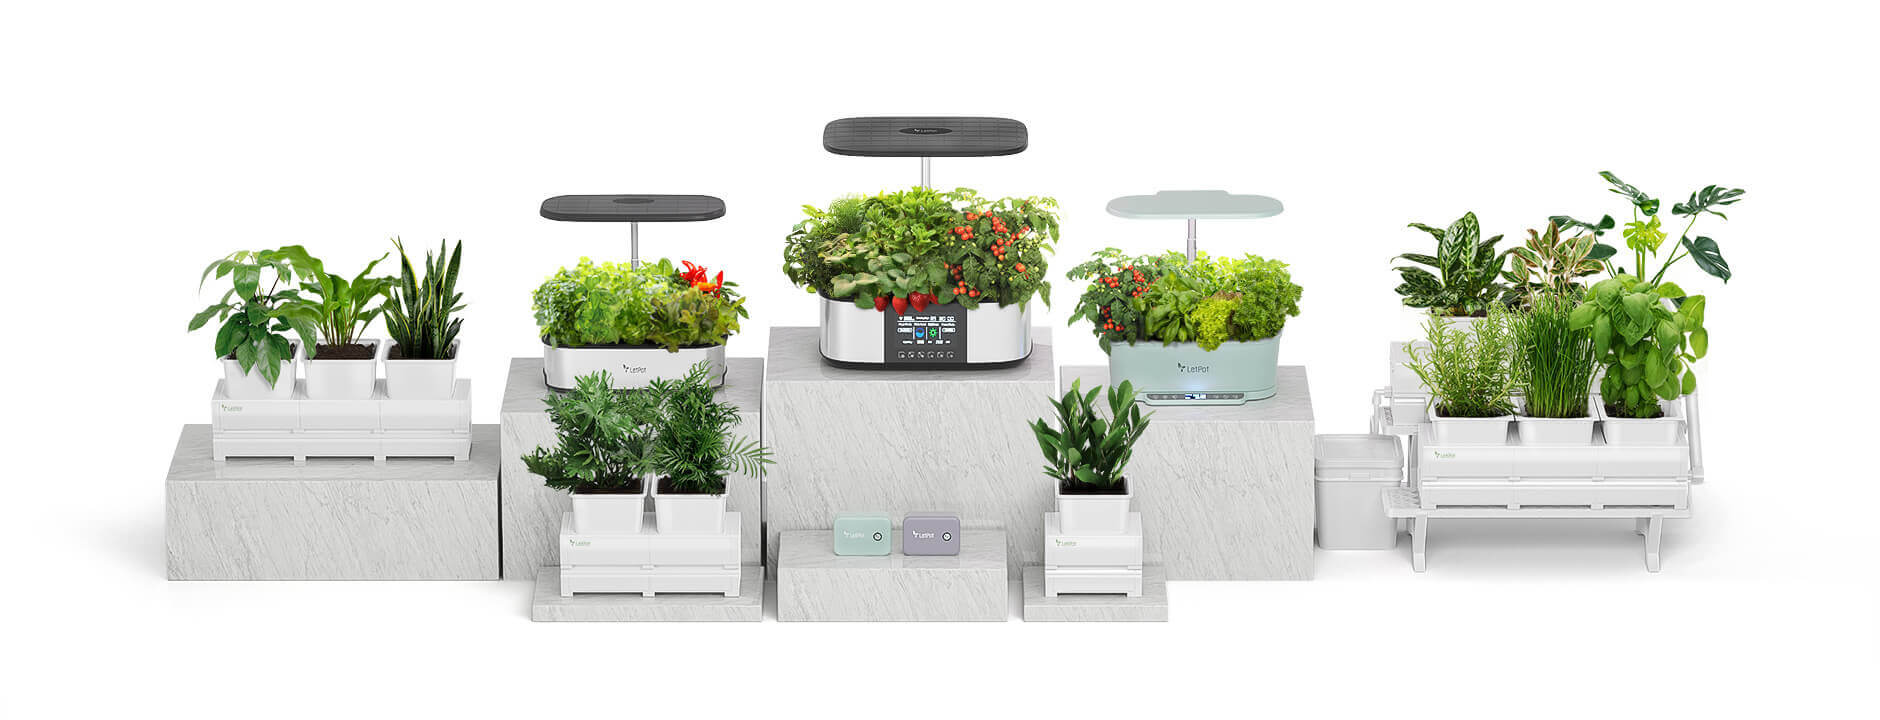 LetPot Plant Growing System Product Collections